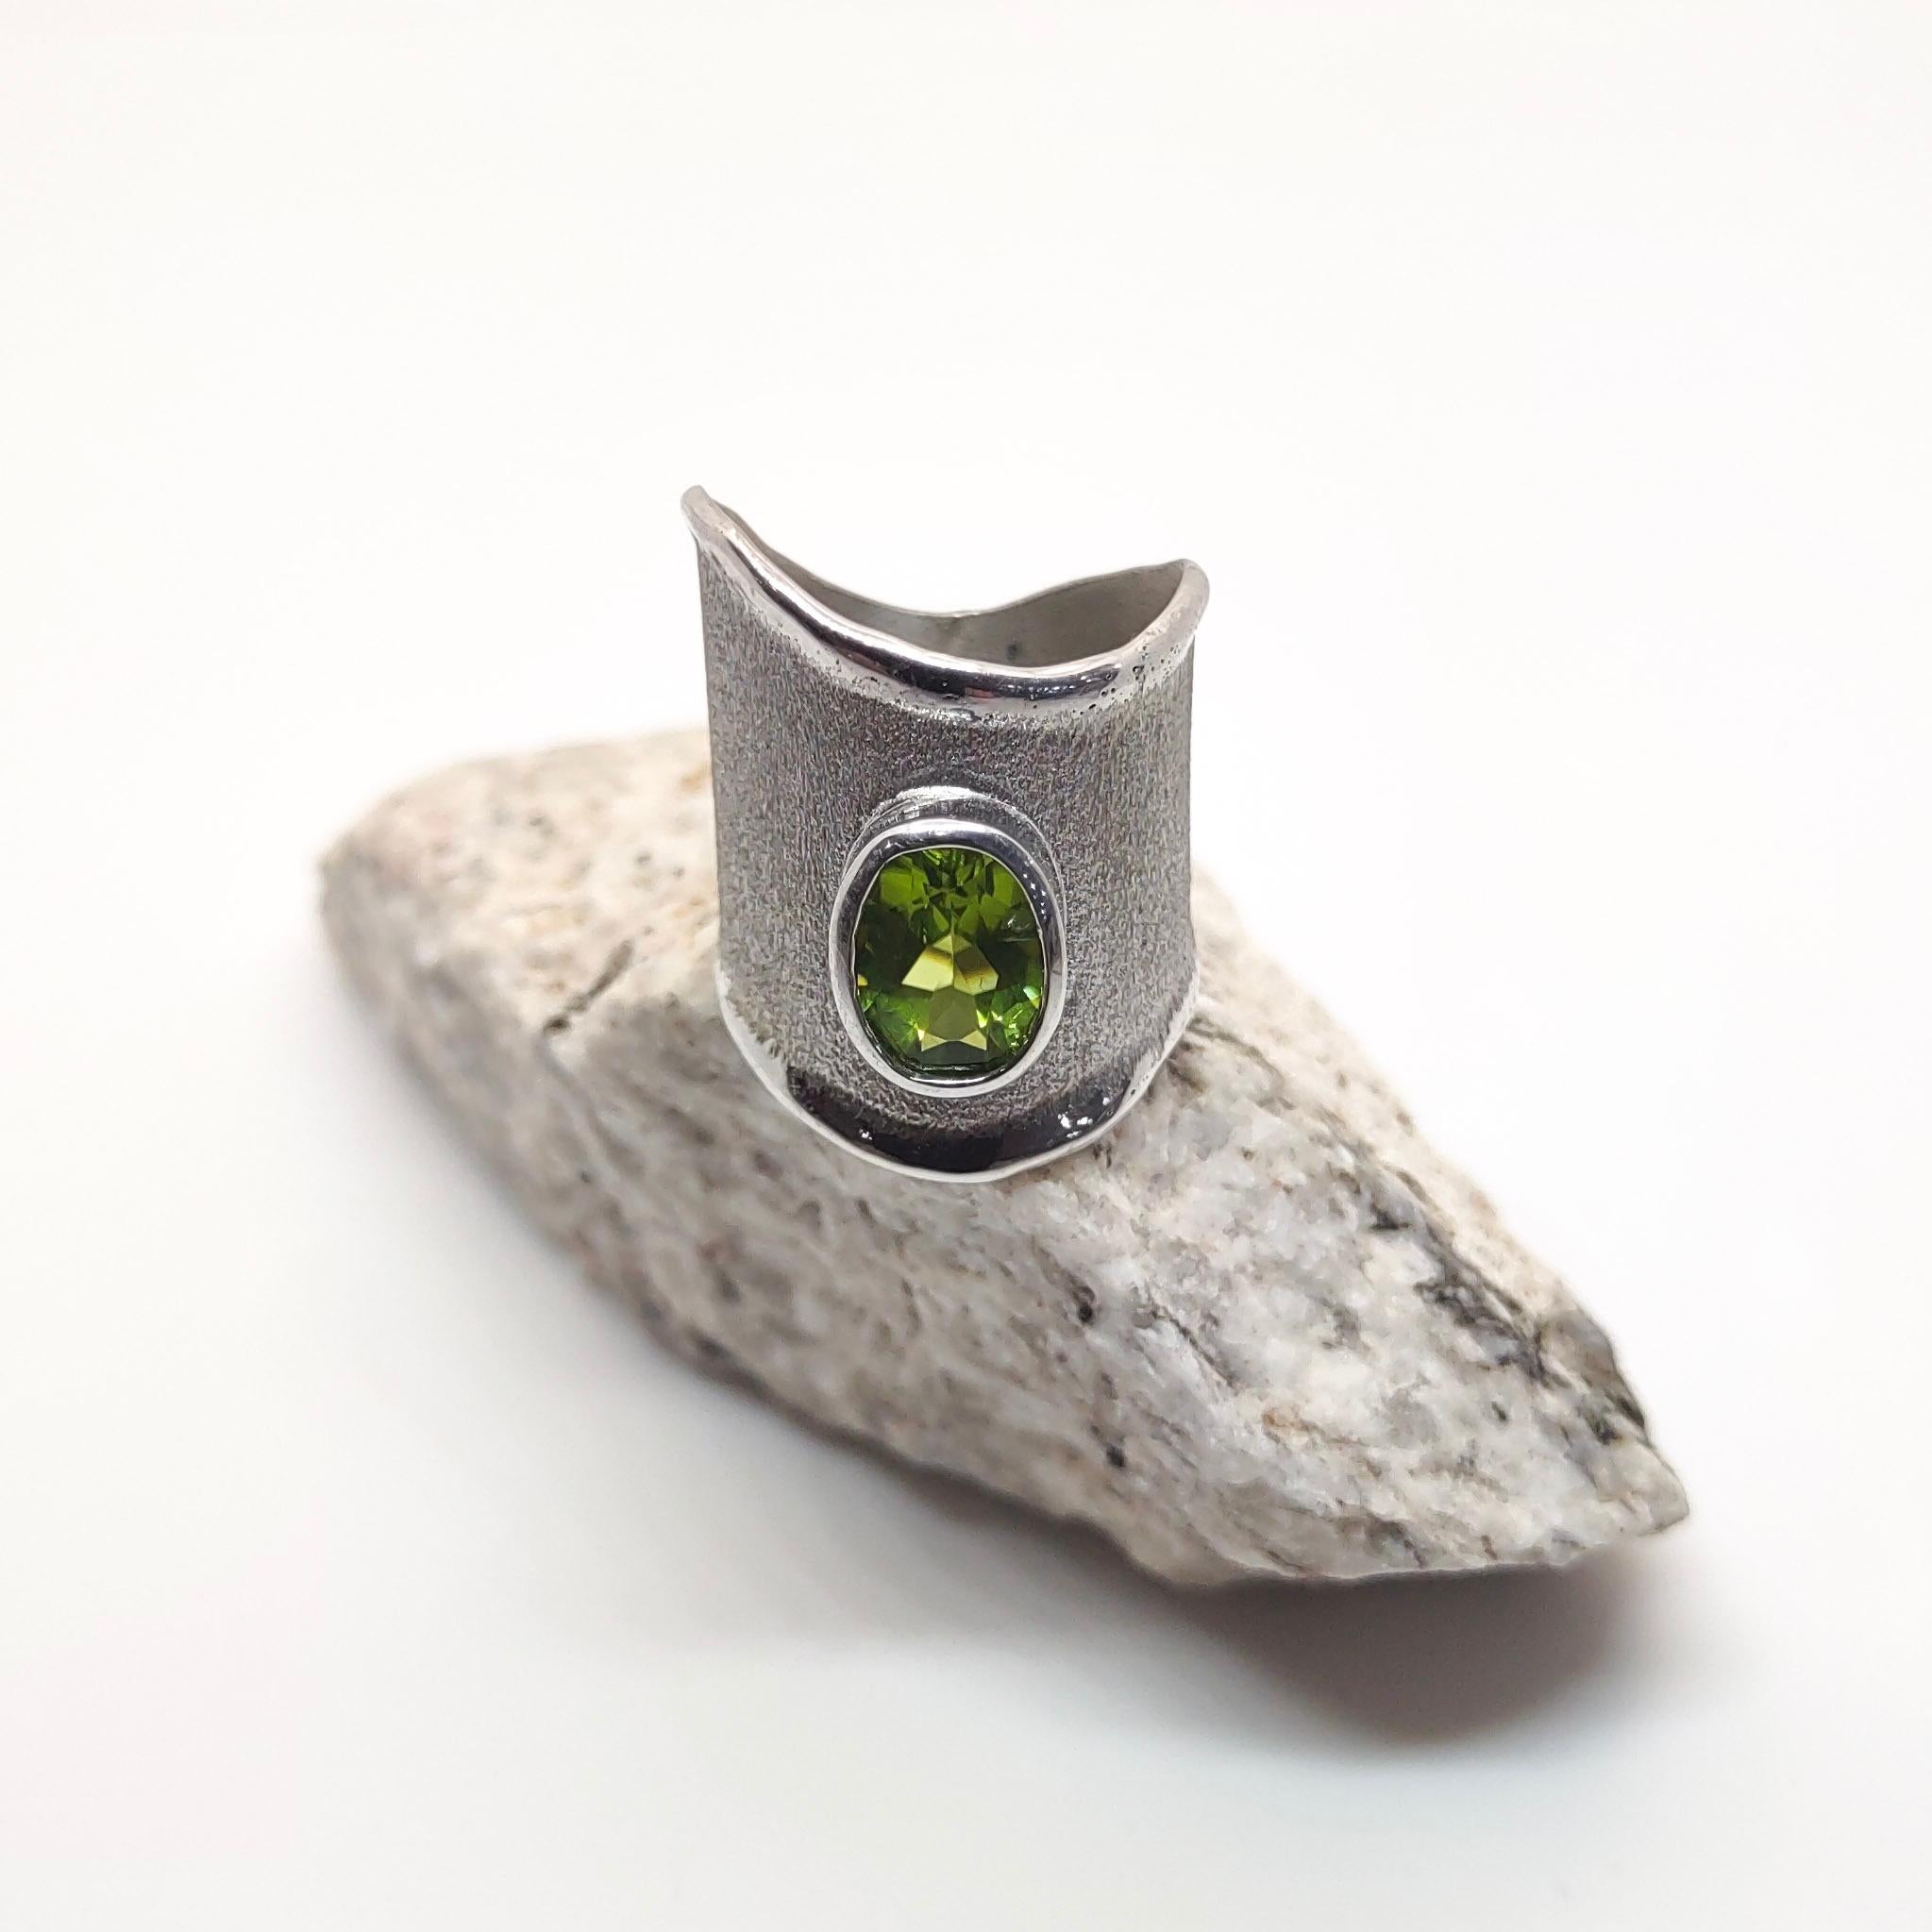 Yianni Creations Ammos Collection 100% Handmade Artisan Ring from Fine Silver featuring 2.00 Carat Peridot complemented by unique craftsmanship techniques - brushed texture and nature-inspired liquid edges. The core of this beautiful abstract-shaped